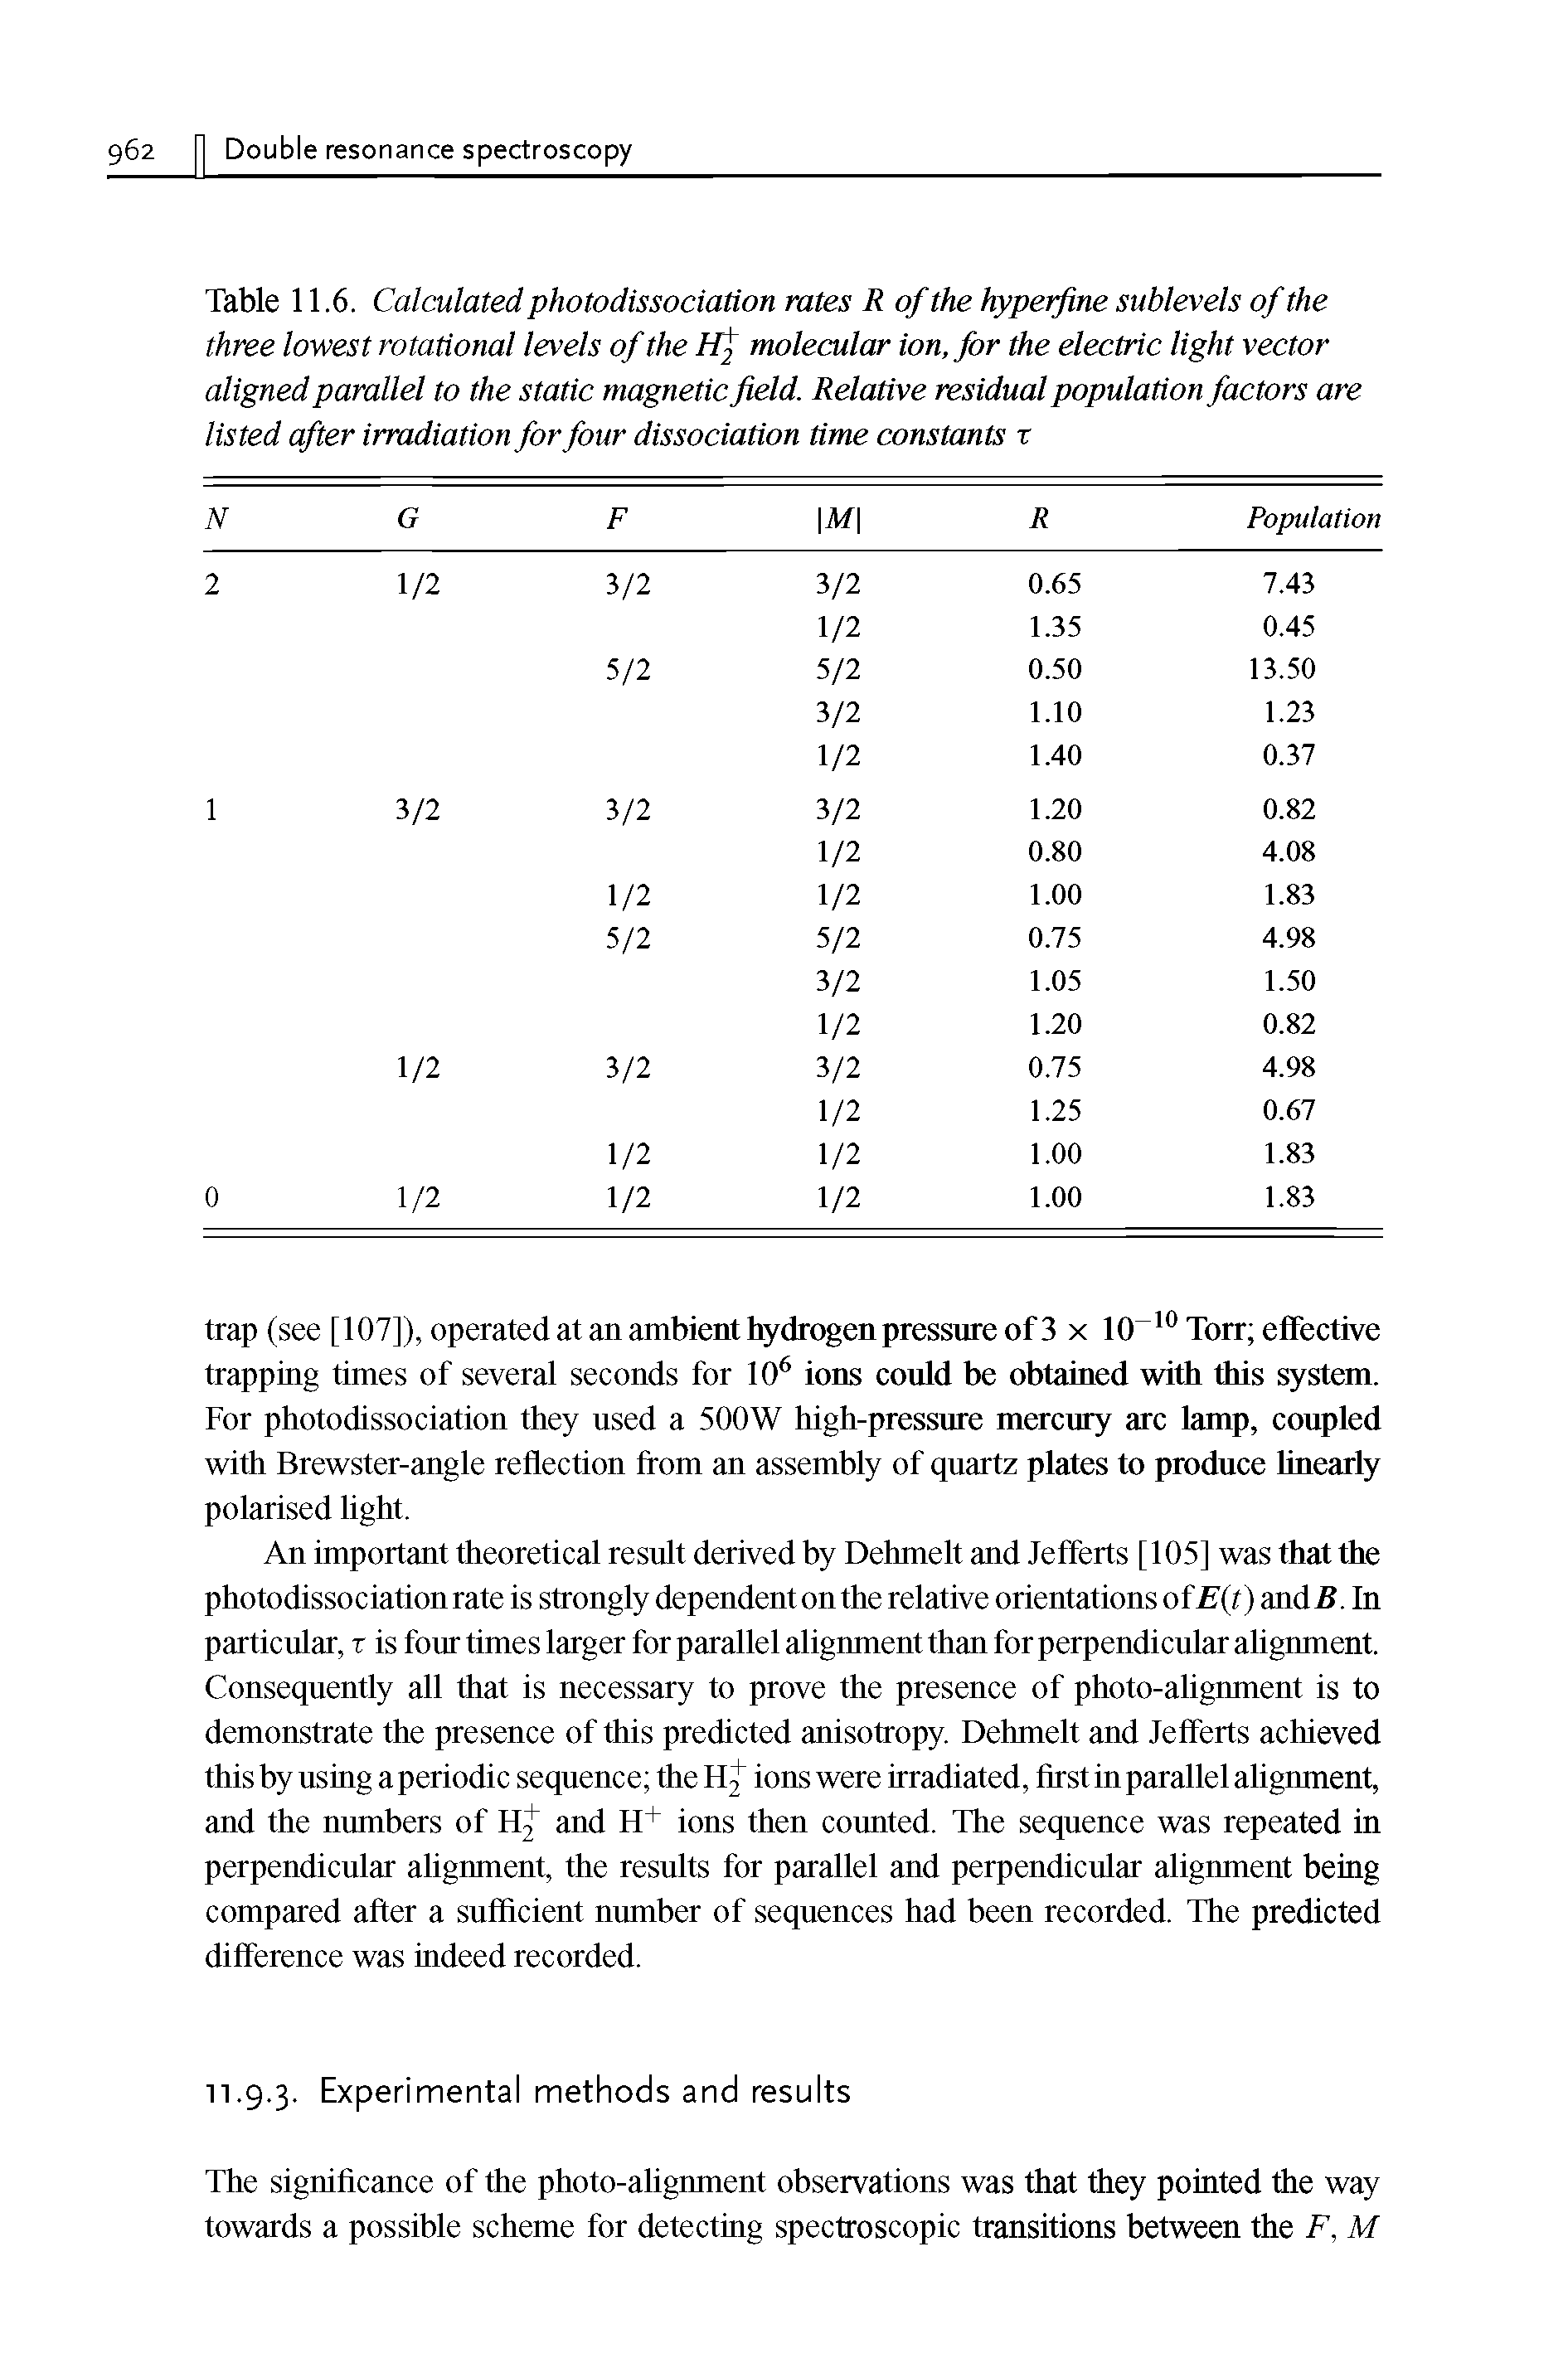 Table 11.6. Calculated photodissociation rates R of the hypetfine sublevels of the three lowest rotational levels of the H molecular ion, for the electric light vector aligned parallel to the static magnetic field. Relative residual population factors are listed after irradiation for four dissociation time constants x...